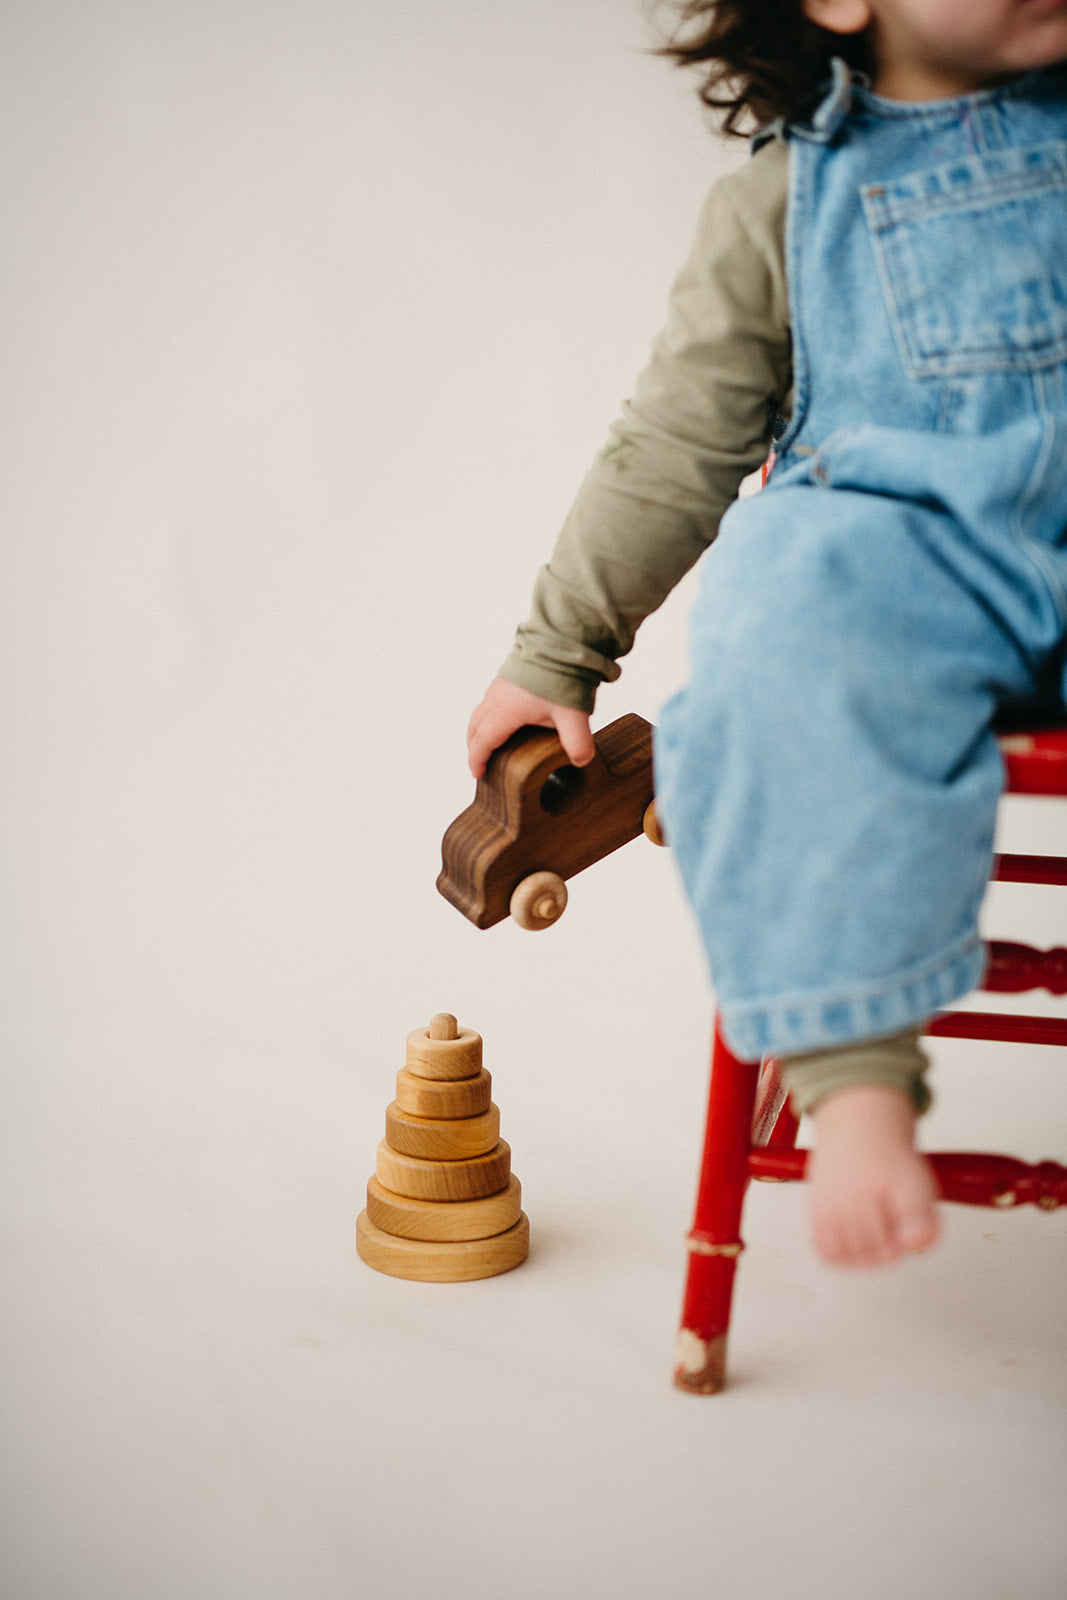 Toddler holding a wooden toy car on a red stool